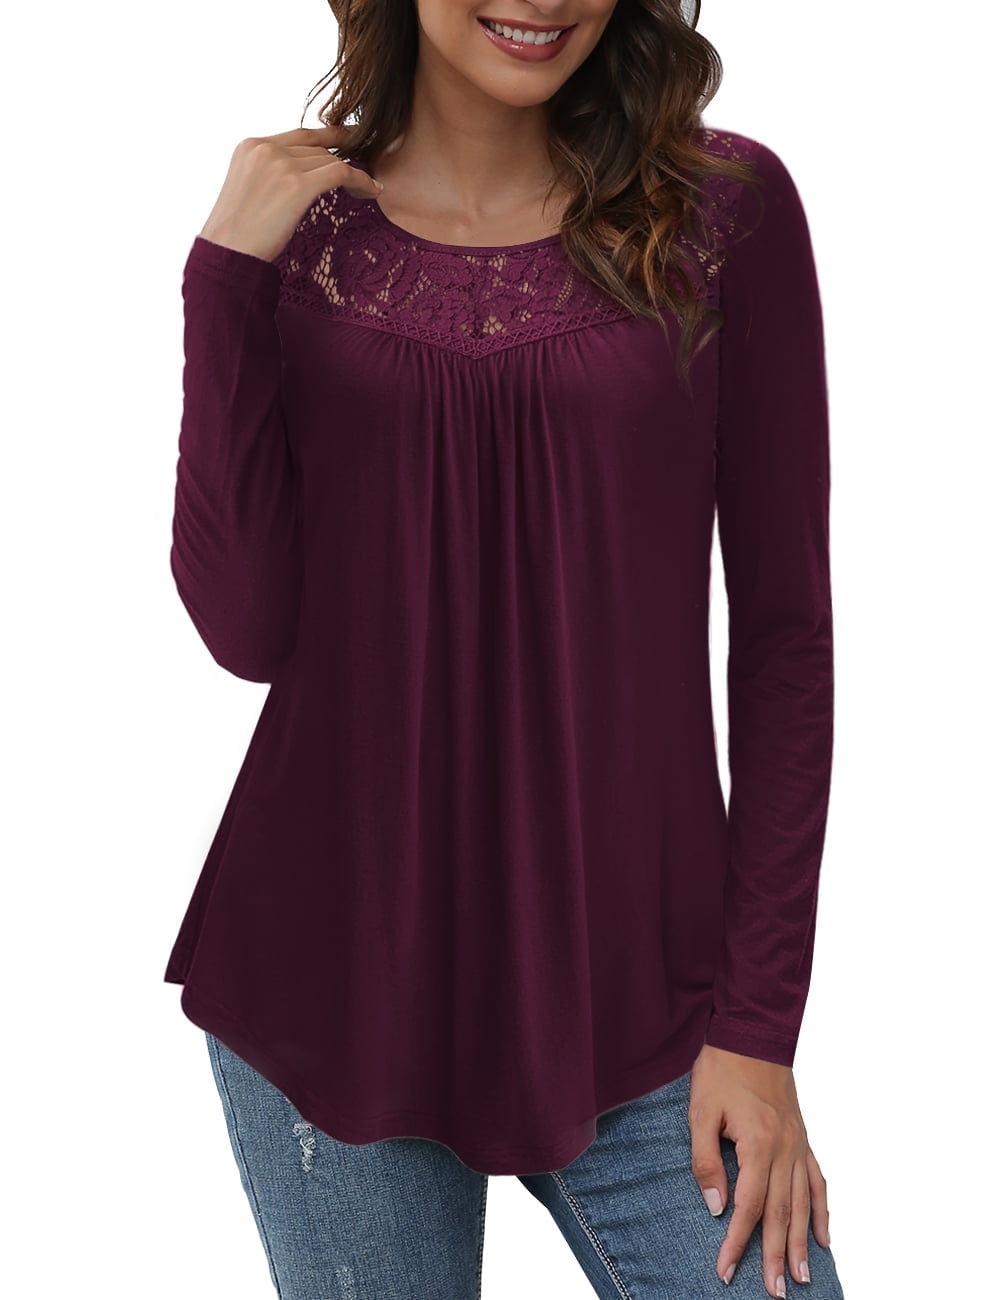 CPOKRTWSO Women's Tops Plus Size Long Sleeve Tunic Blouses Lace Flowy ...